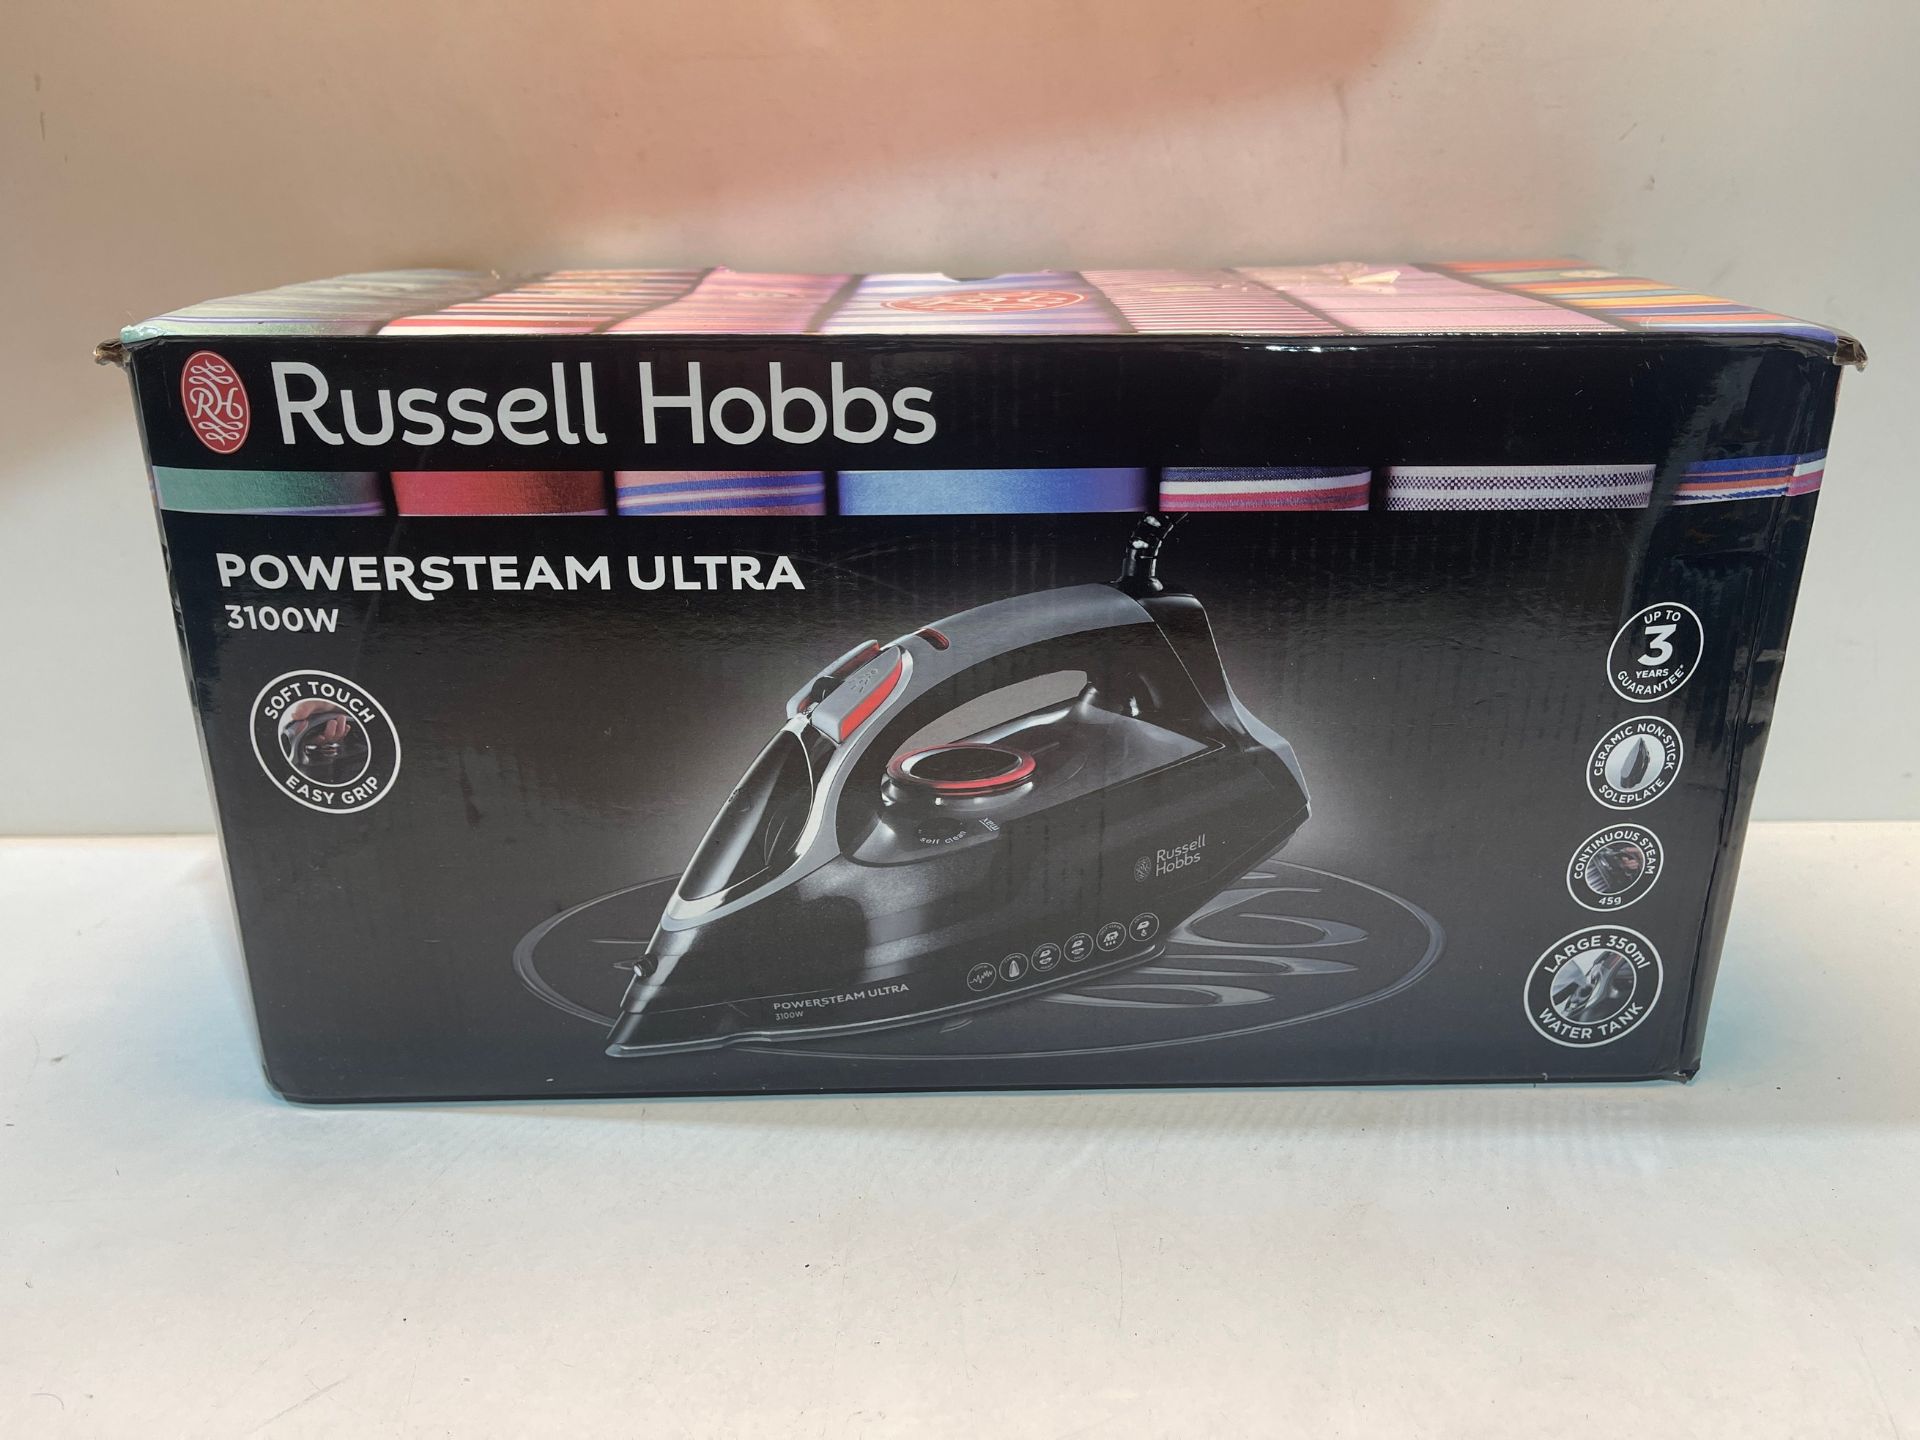 Russell Hobbs Powersteam Ultra 3100 W Vertical Steam Iron 20630 - Black and Grey Â£49.99Condition - Image 2 of 2